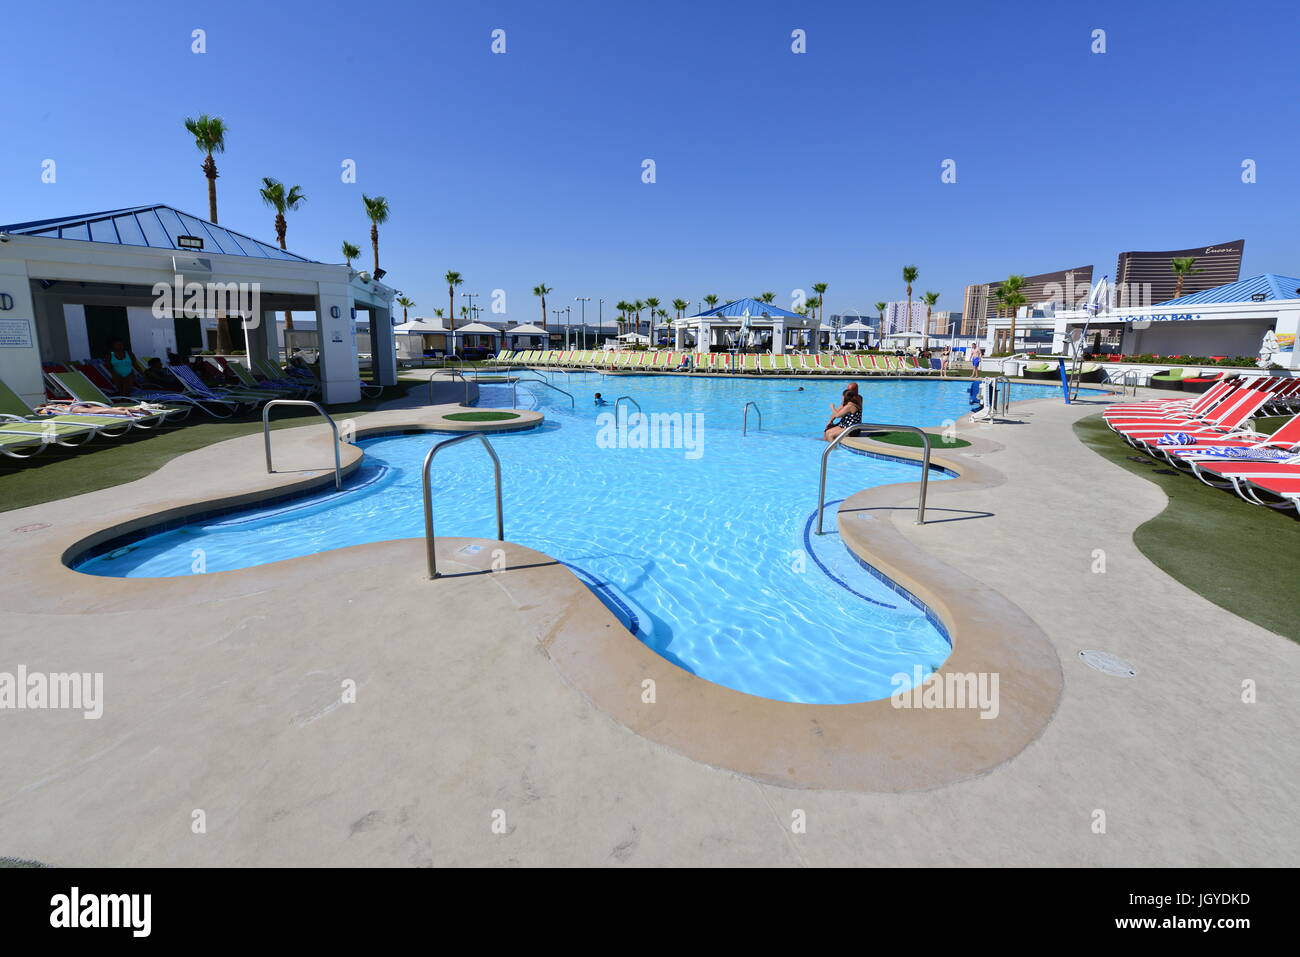 Pool area at a hotel in Las Vegas Stock Photo